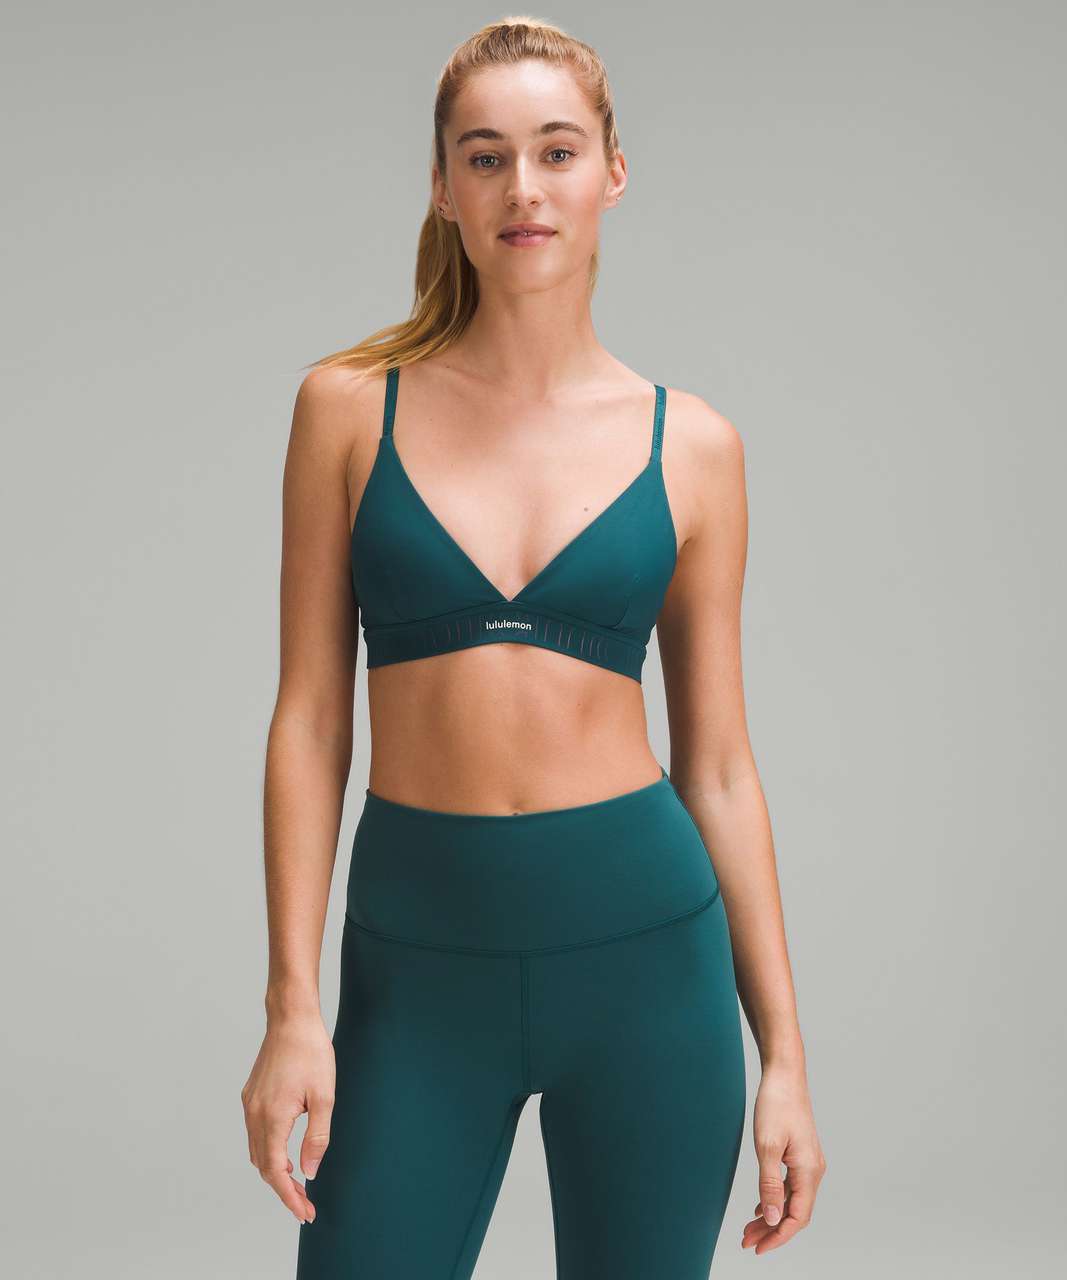 Lululemon License to Train Triangle Bra Light Support, A/B Cup *Logo - Storm Teal